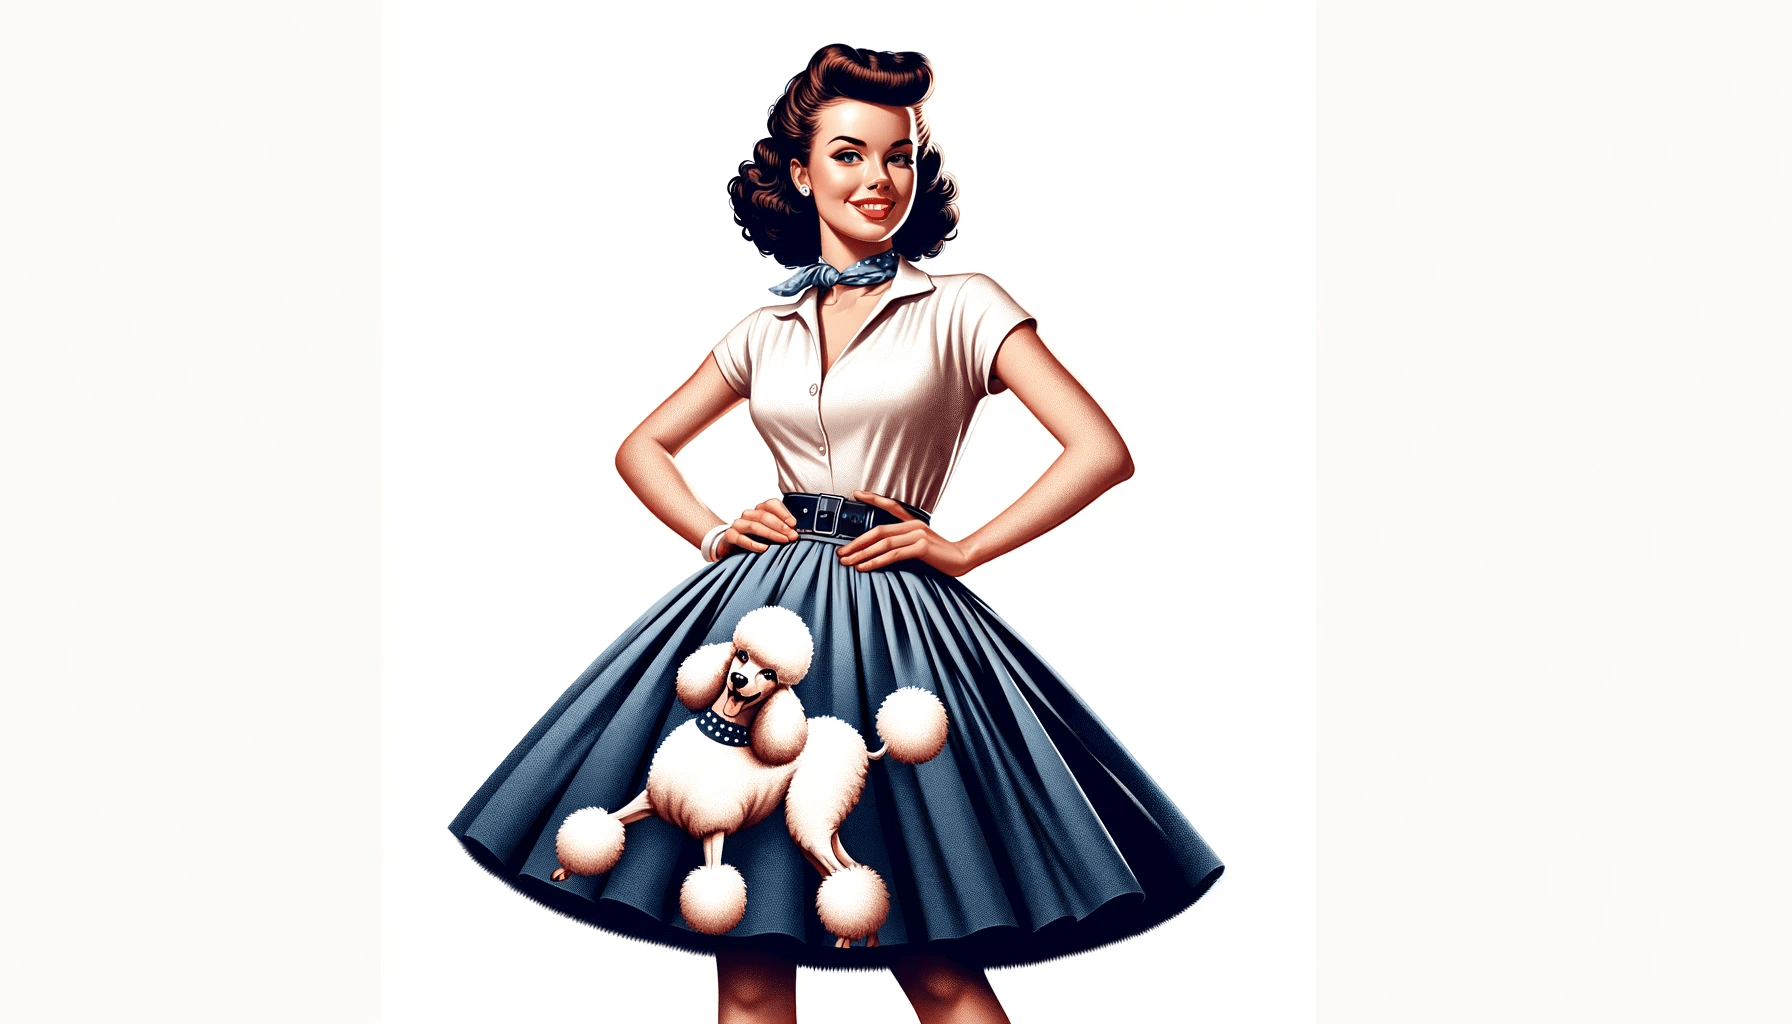 Poodle Skirt of the 1950s American Traditional Attire